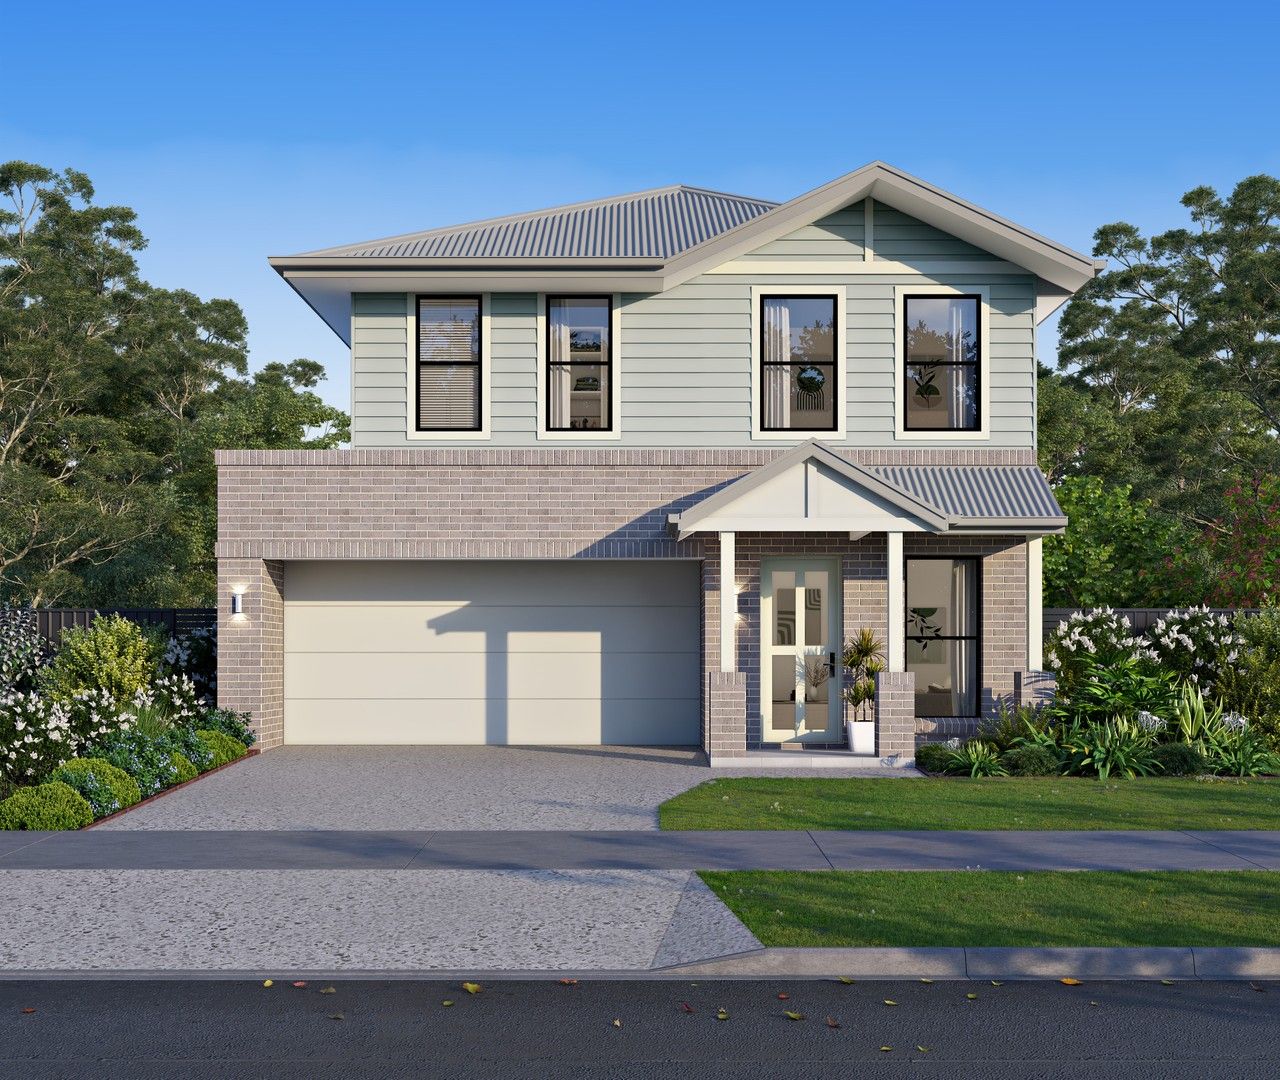 4 bedrooms New House & Land in Lot 3860 Proposed Road MARSDEN PARK NSW, 2765